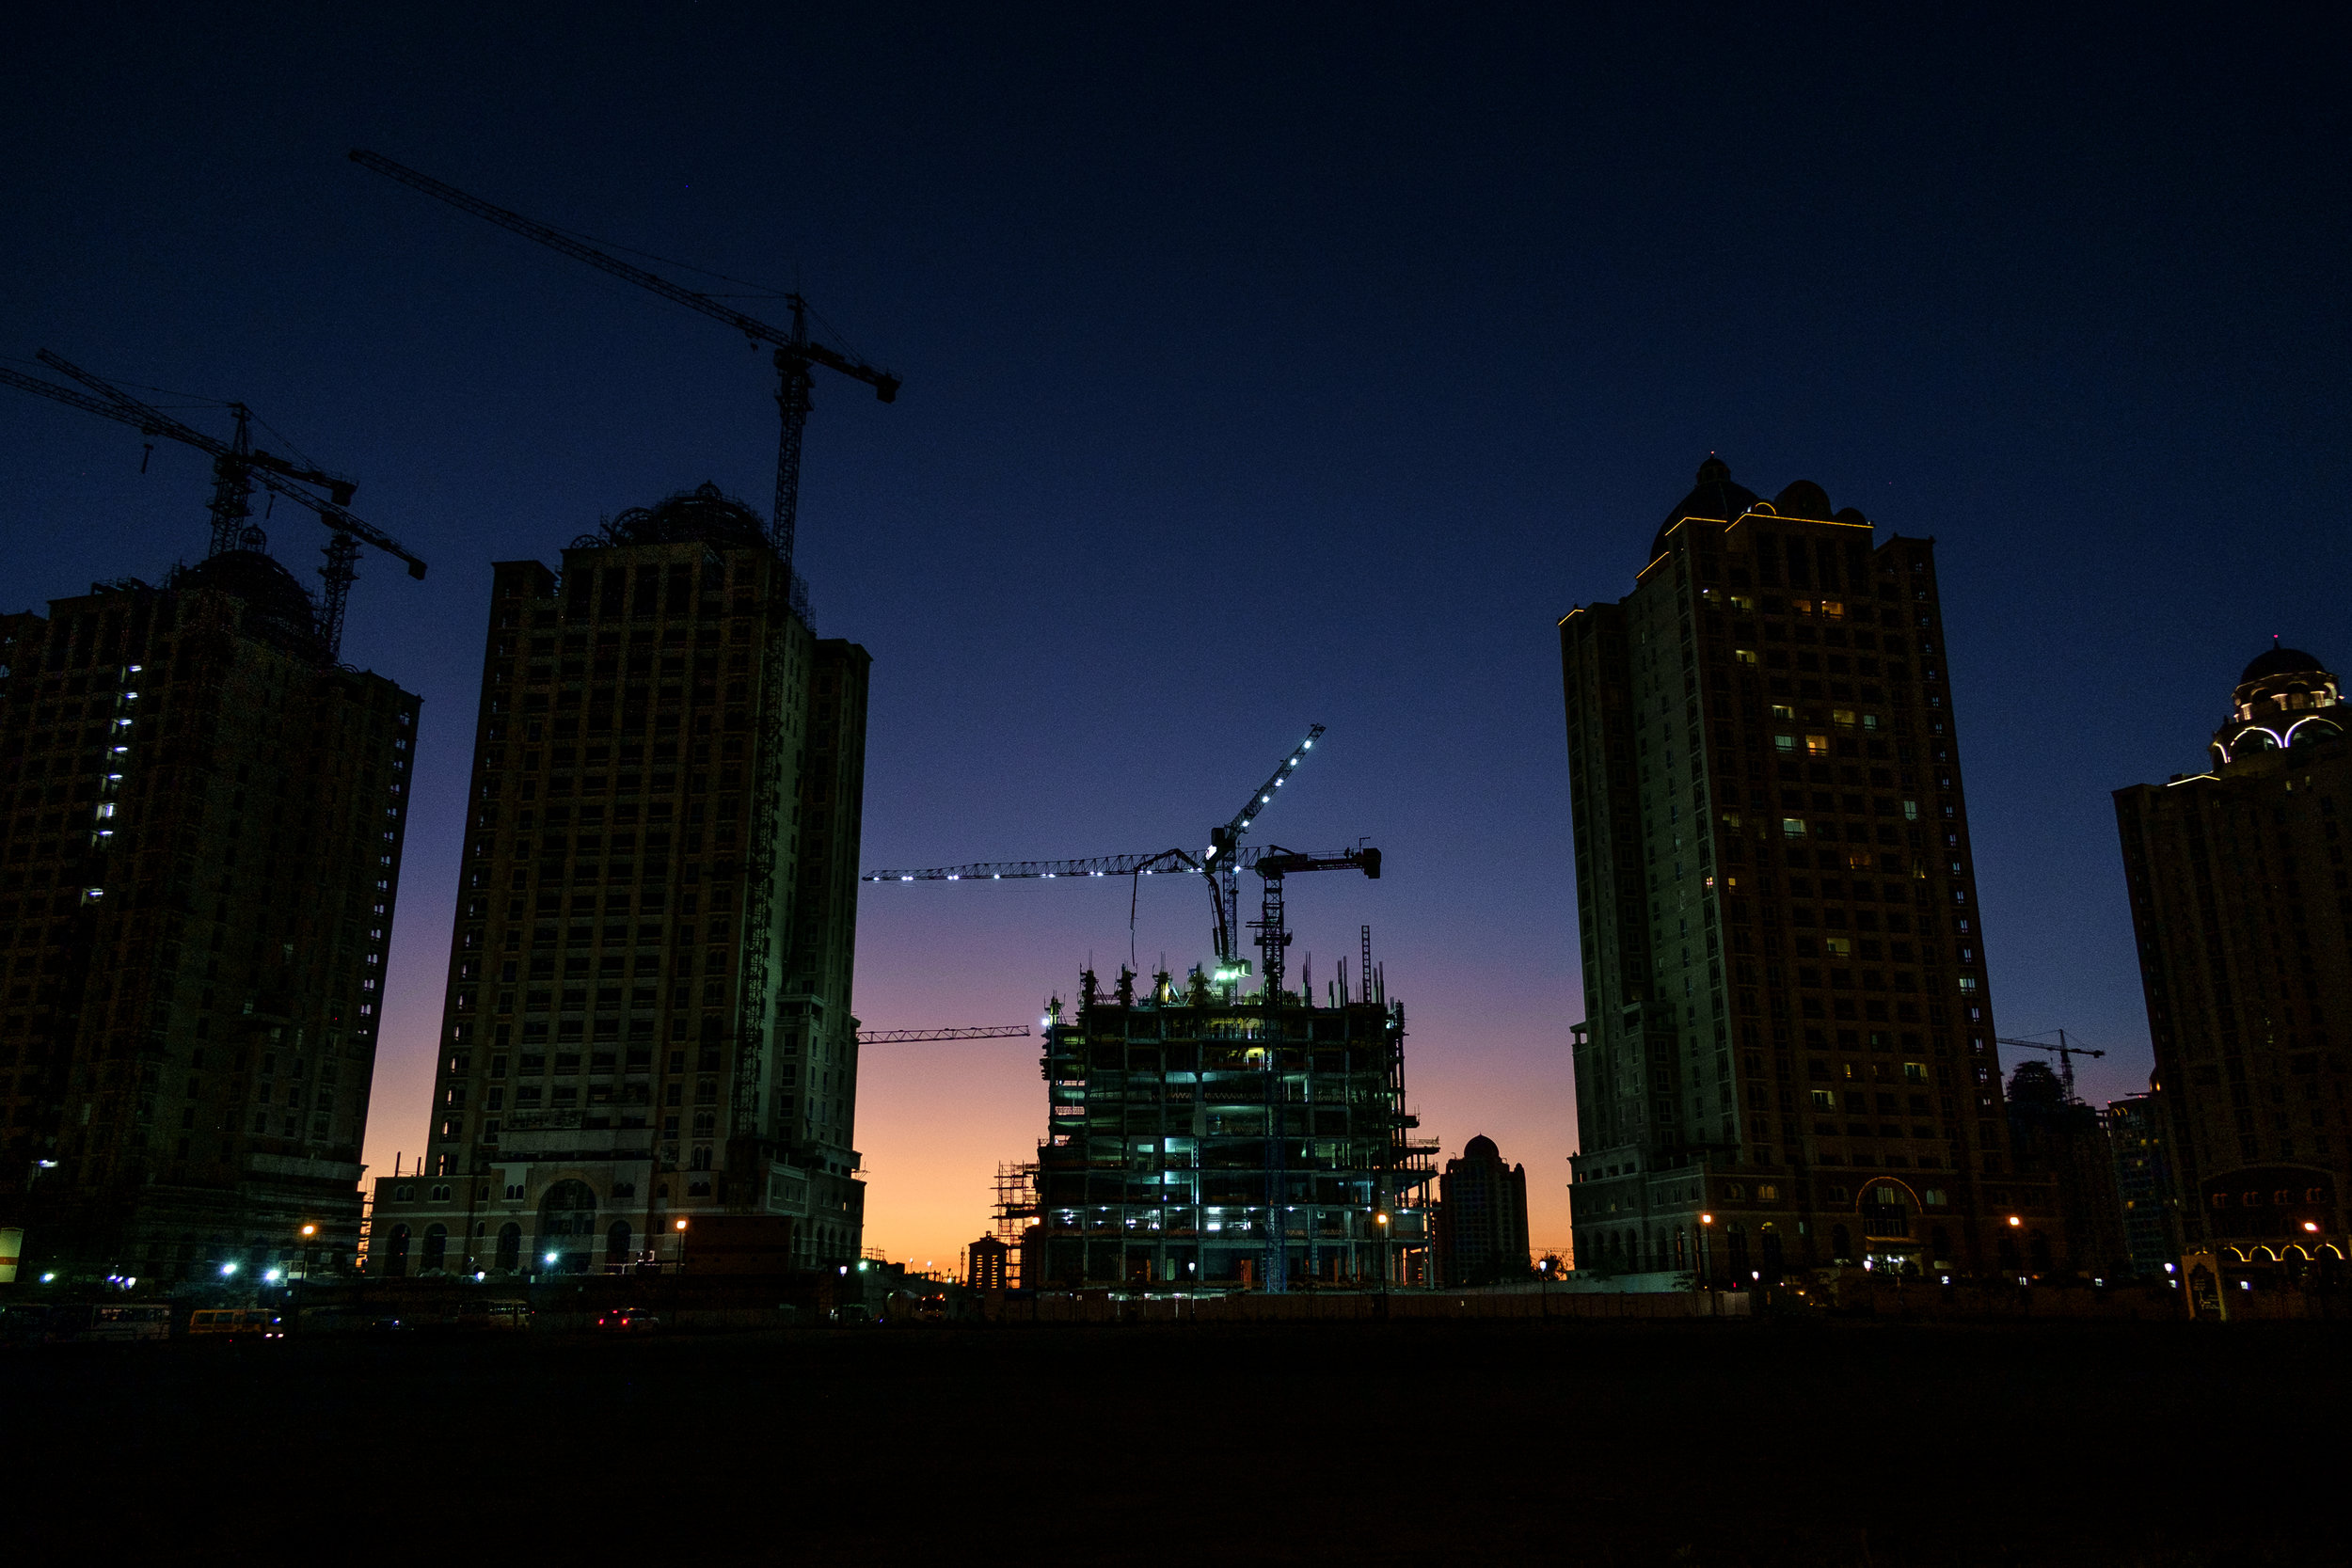  Construction of a residential tower at the Viva Bahriya development on The Pearl is seen in the evening. The Pearl is an artificial island comprising of luxury residential estates and businesses. It is the first land in Qatar made available for owne